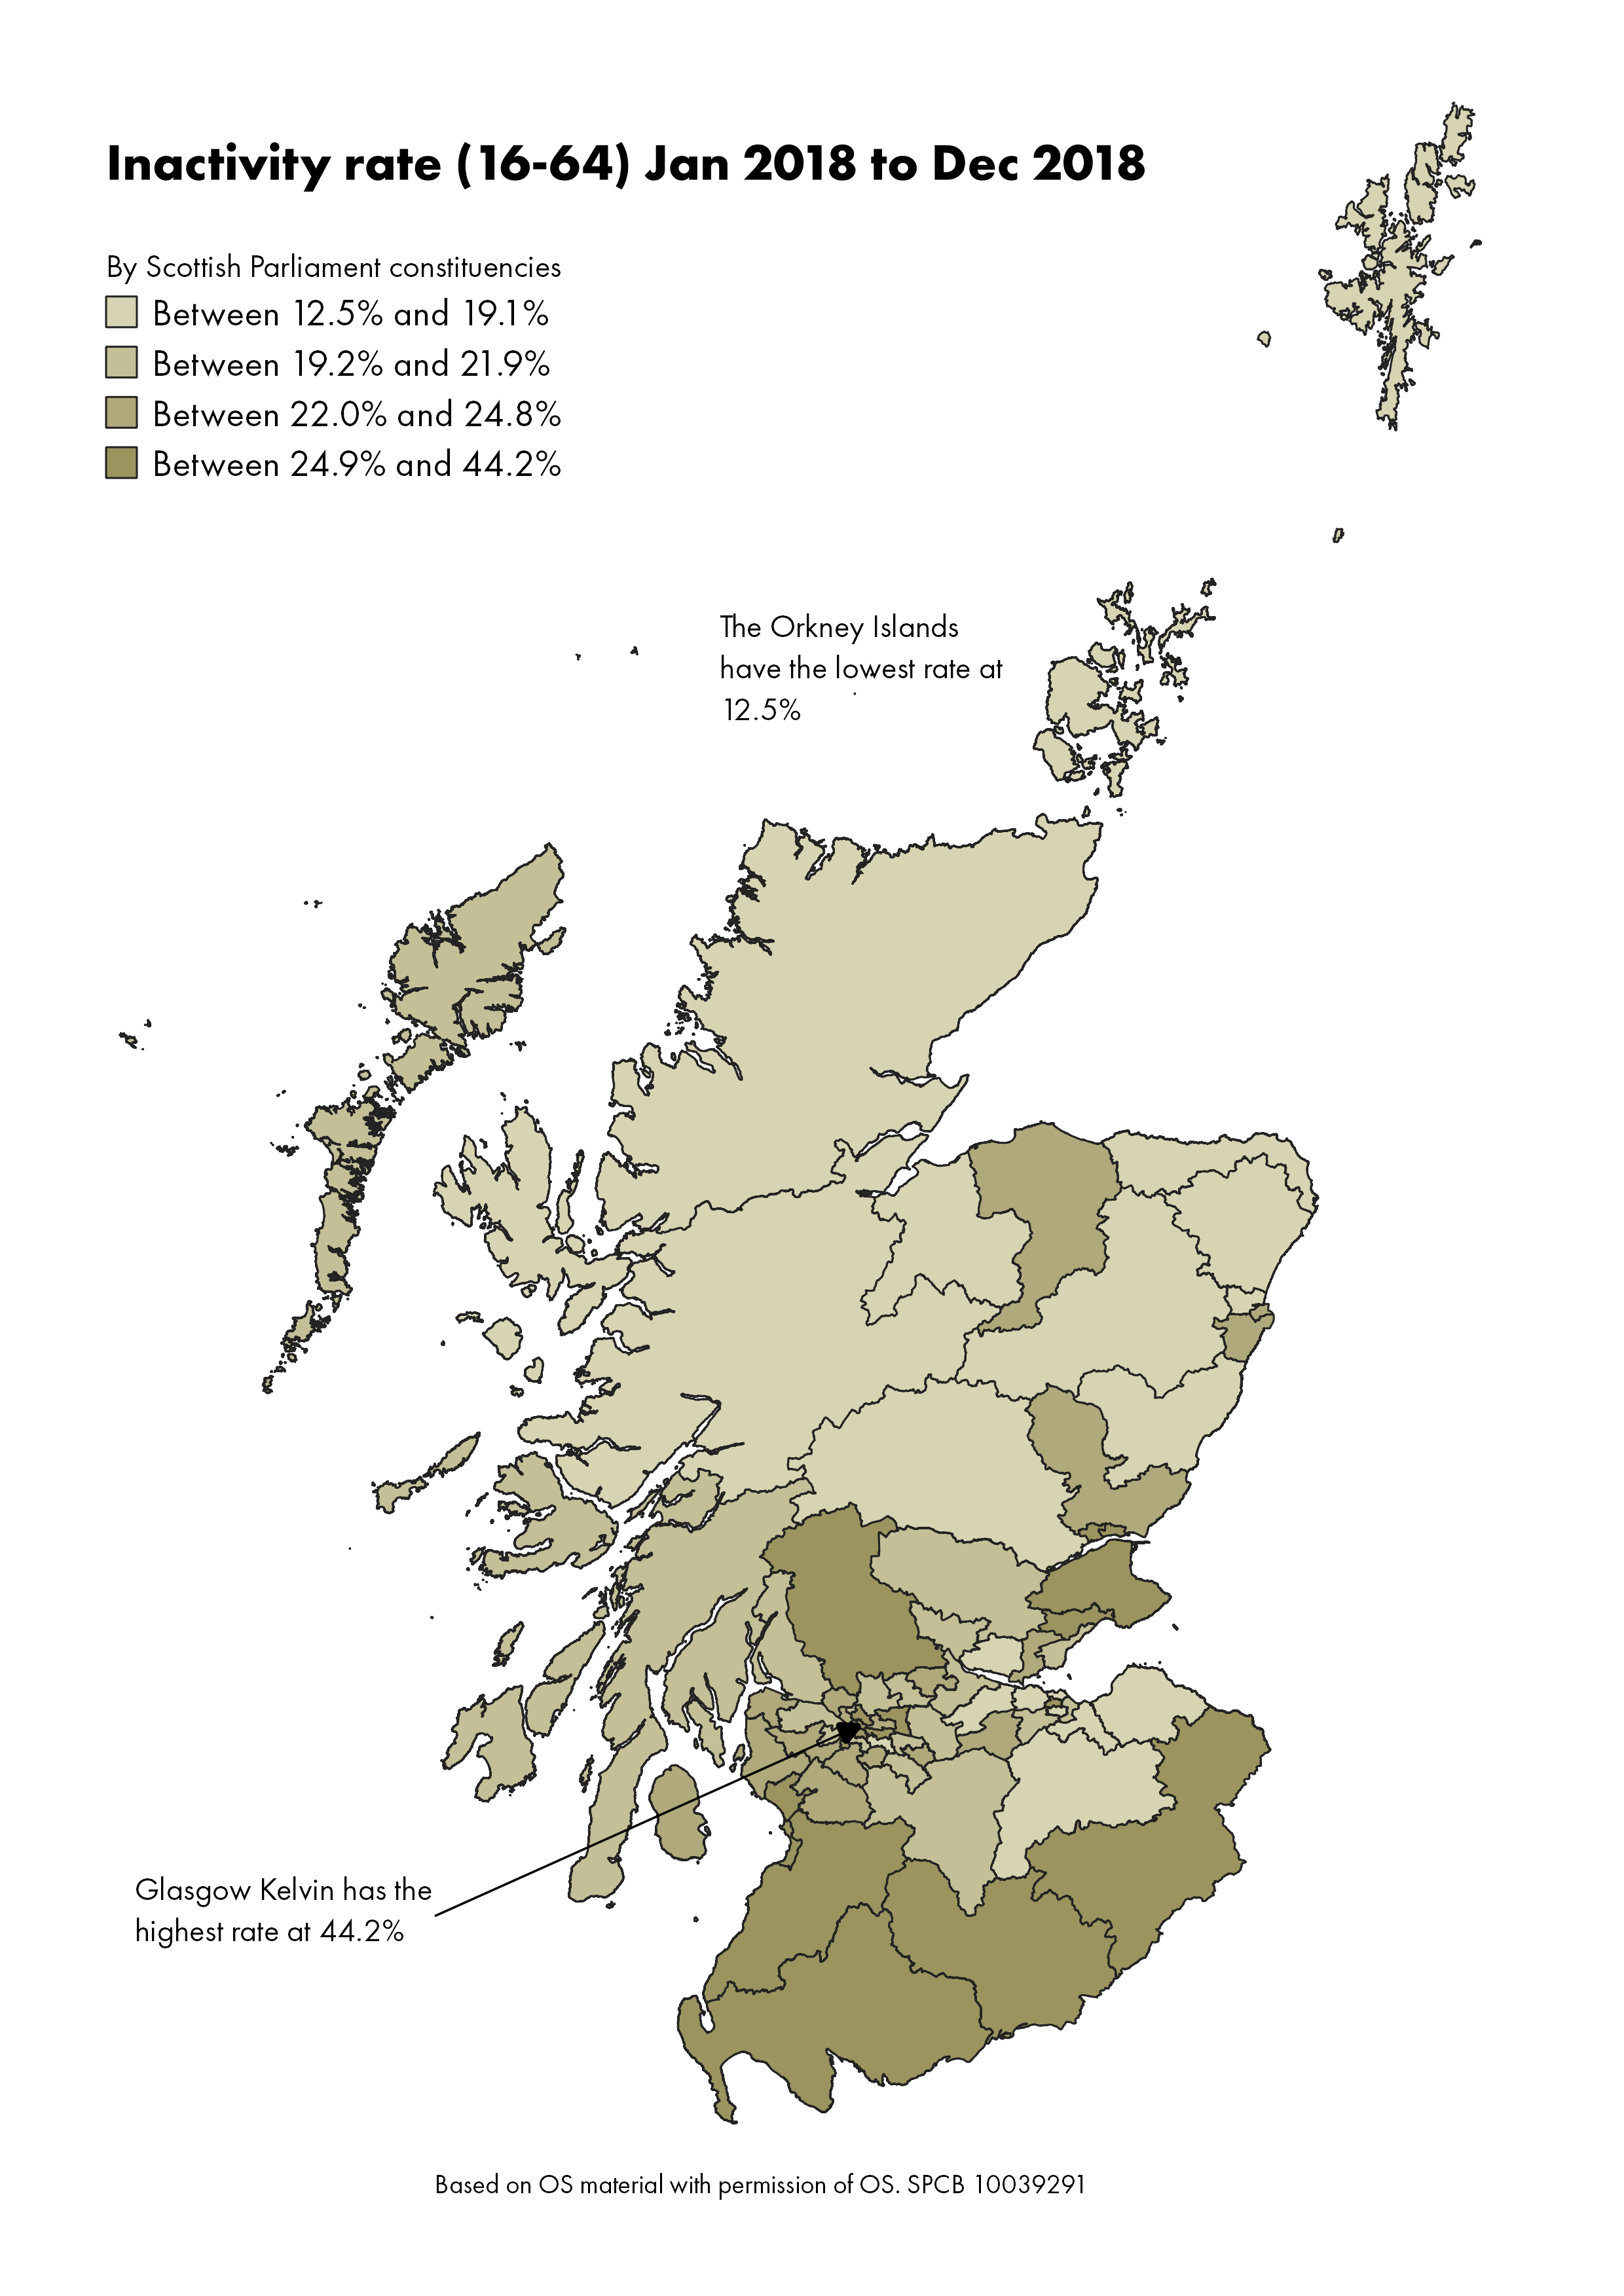 The economic inactivity rates for people aged between 16 and over for each Scottish Parliamentary constituency.